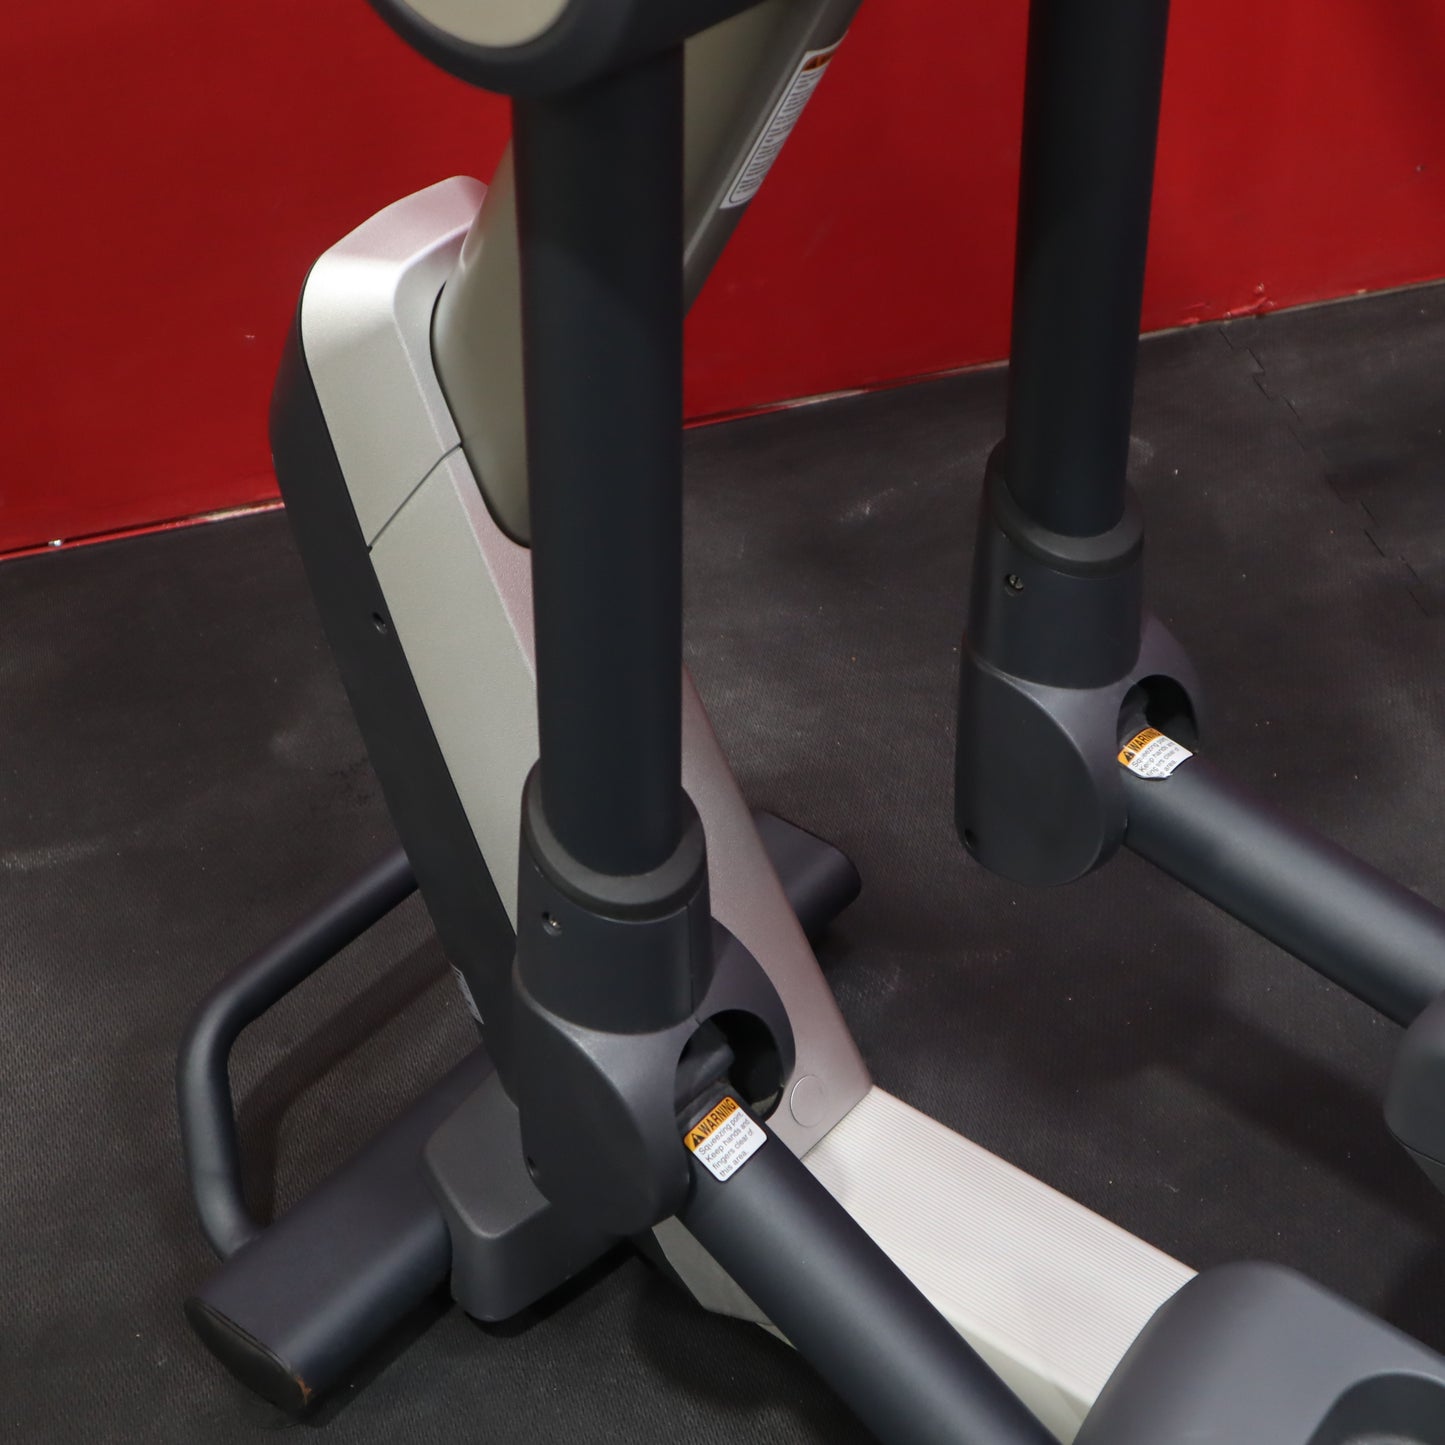 Freemotion e10.6 Elliptical Trainer (With TV) *Refurbished*